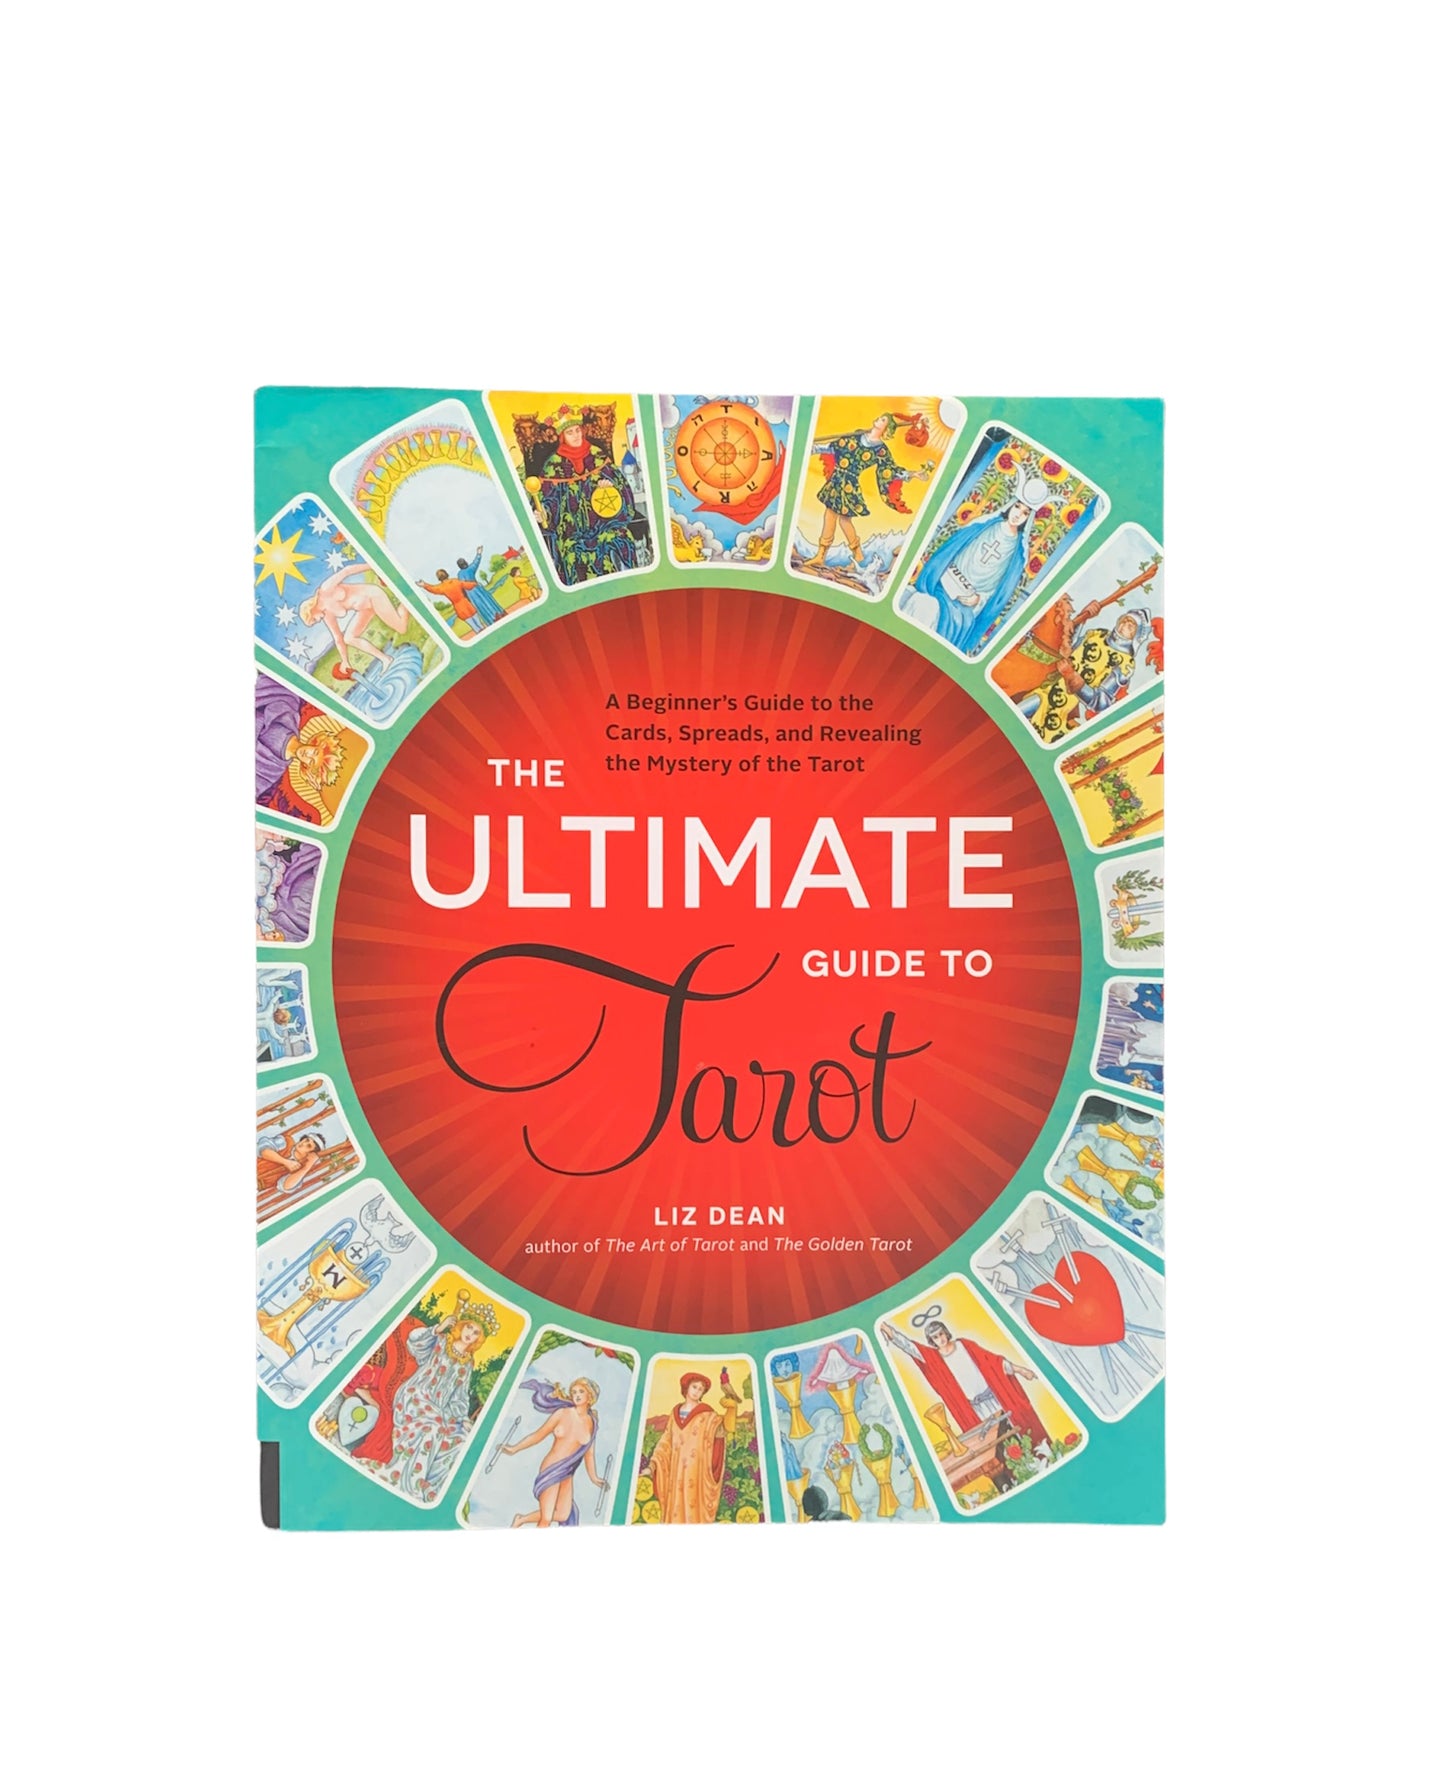 Ultimate Guide to Tarot A Beginner's Guide to the Cards, Spreads, and Revealing the Mystery of the Tarot